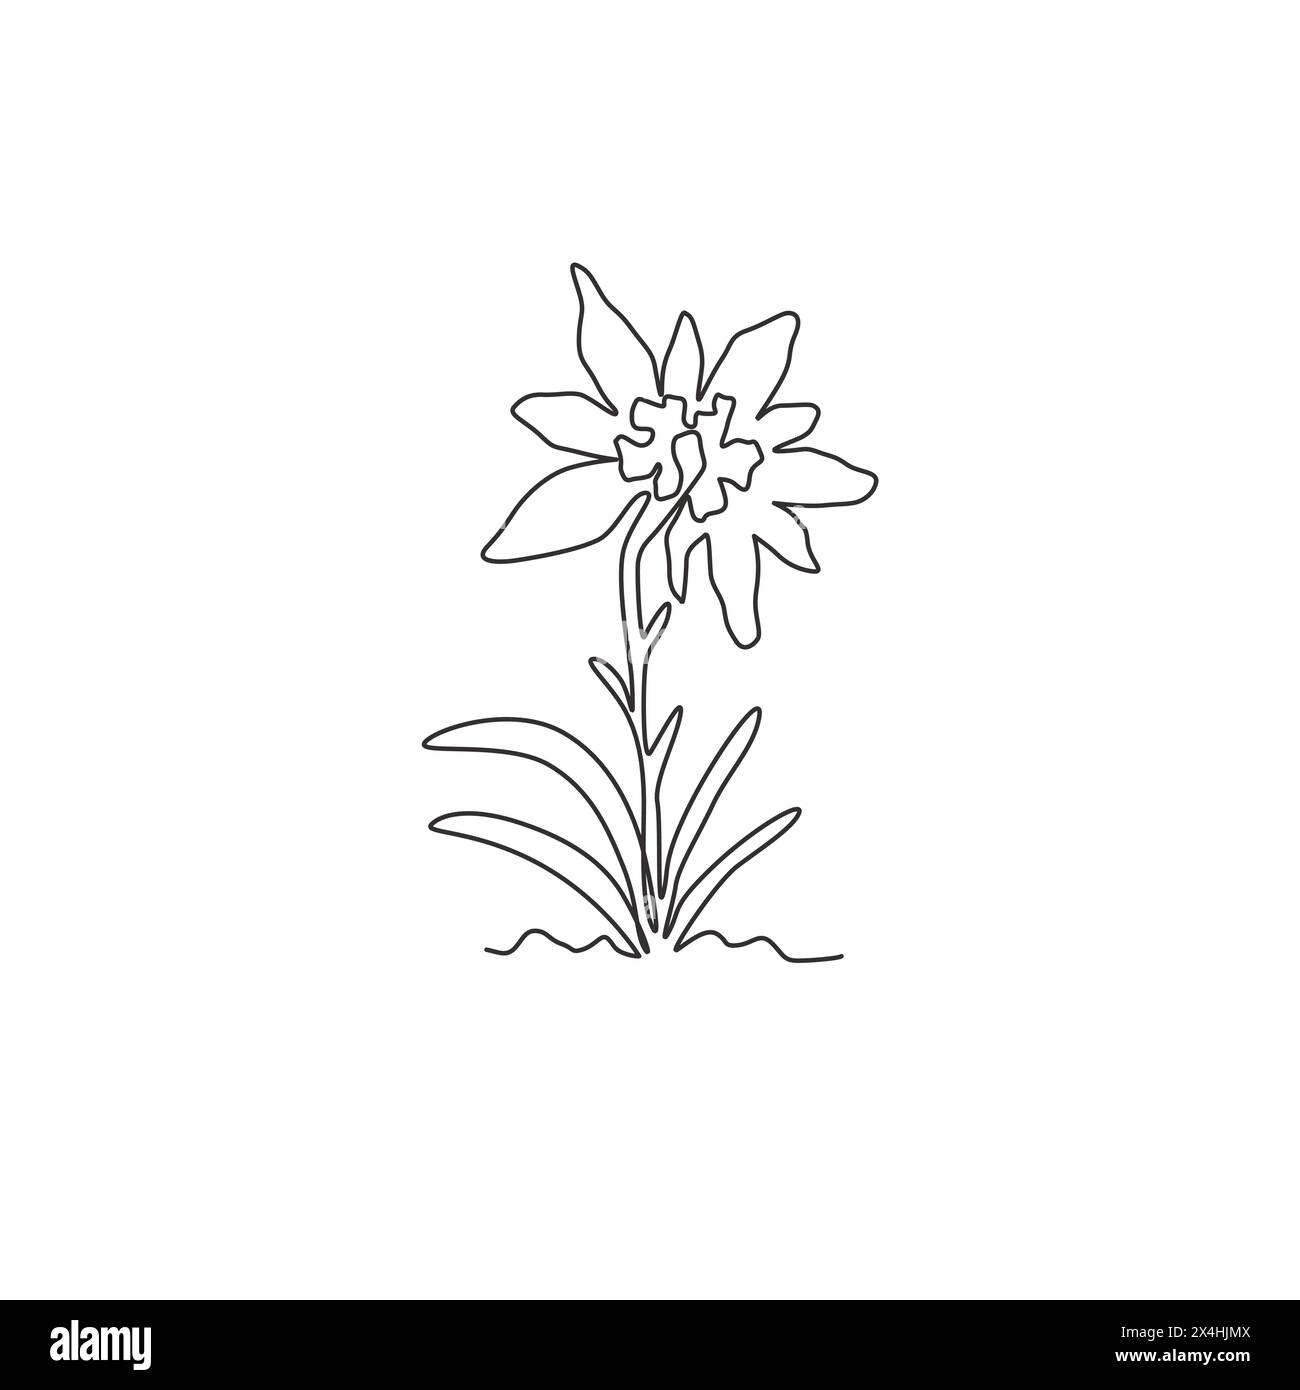 Single one line drawing beauty and exotic mountain leontopodium plant. Decorative edelweiss flower concept for home decor wall art poster print. Moder Stock Vector